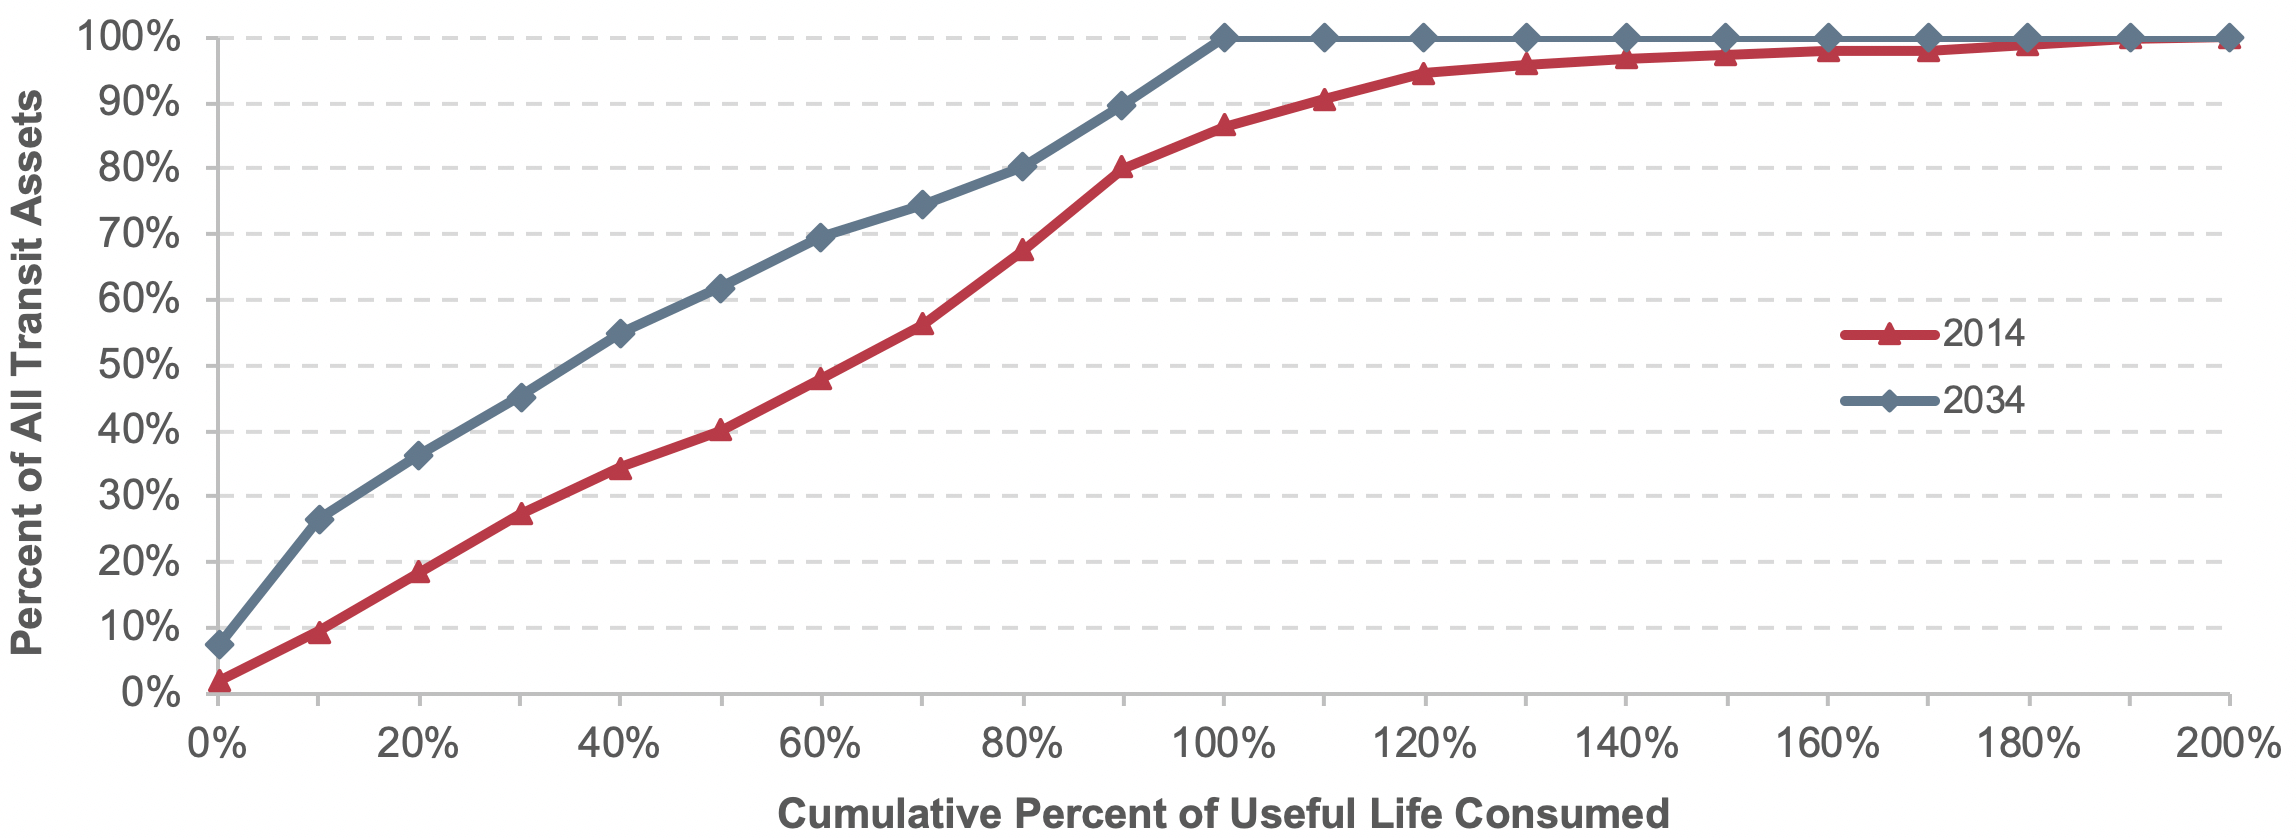 A line graph plots values for share of all transit assets in percent over percent of useful life consumed for the year 2014 and the year 2034.  The plot for the year 2014 has an initial value of 2 percent of all assets for 0 percent of useful life consumed, steadily increases to a value of 91 percent of all assets for 110 percent of useful life consumed, then tapers off to 100 percent of all assets for 200 percent of useful life consumed.  The plot for the year 2034 has an initial value of 7 percent of all assets for 0 percent of useful life consumed, steadily climbs to a value of 100 percent of all assets for 100 percent of useful life consumed, then remains at 100 percent through the remaining percent of useful life consumed until its final value of 200 percent of useful life consumed.  Source:  Transit Economic Requirements Model.  